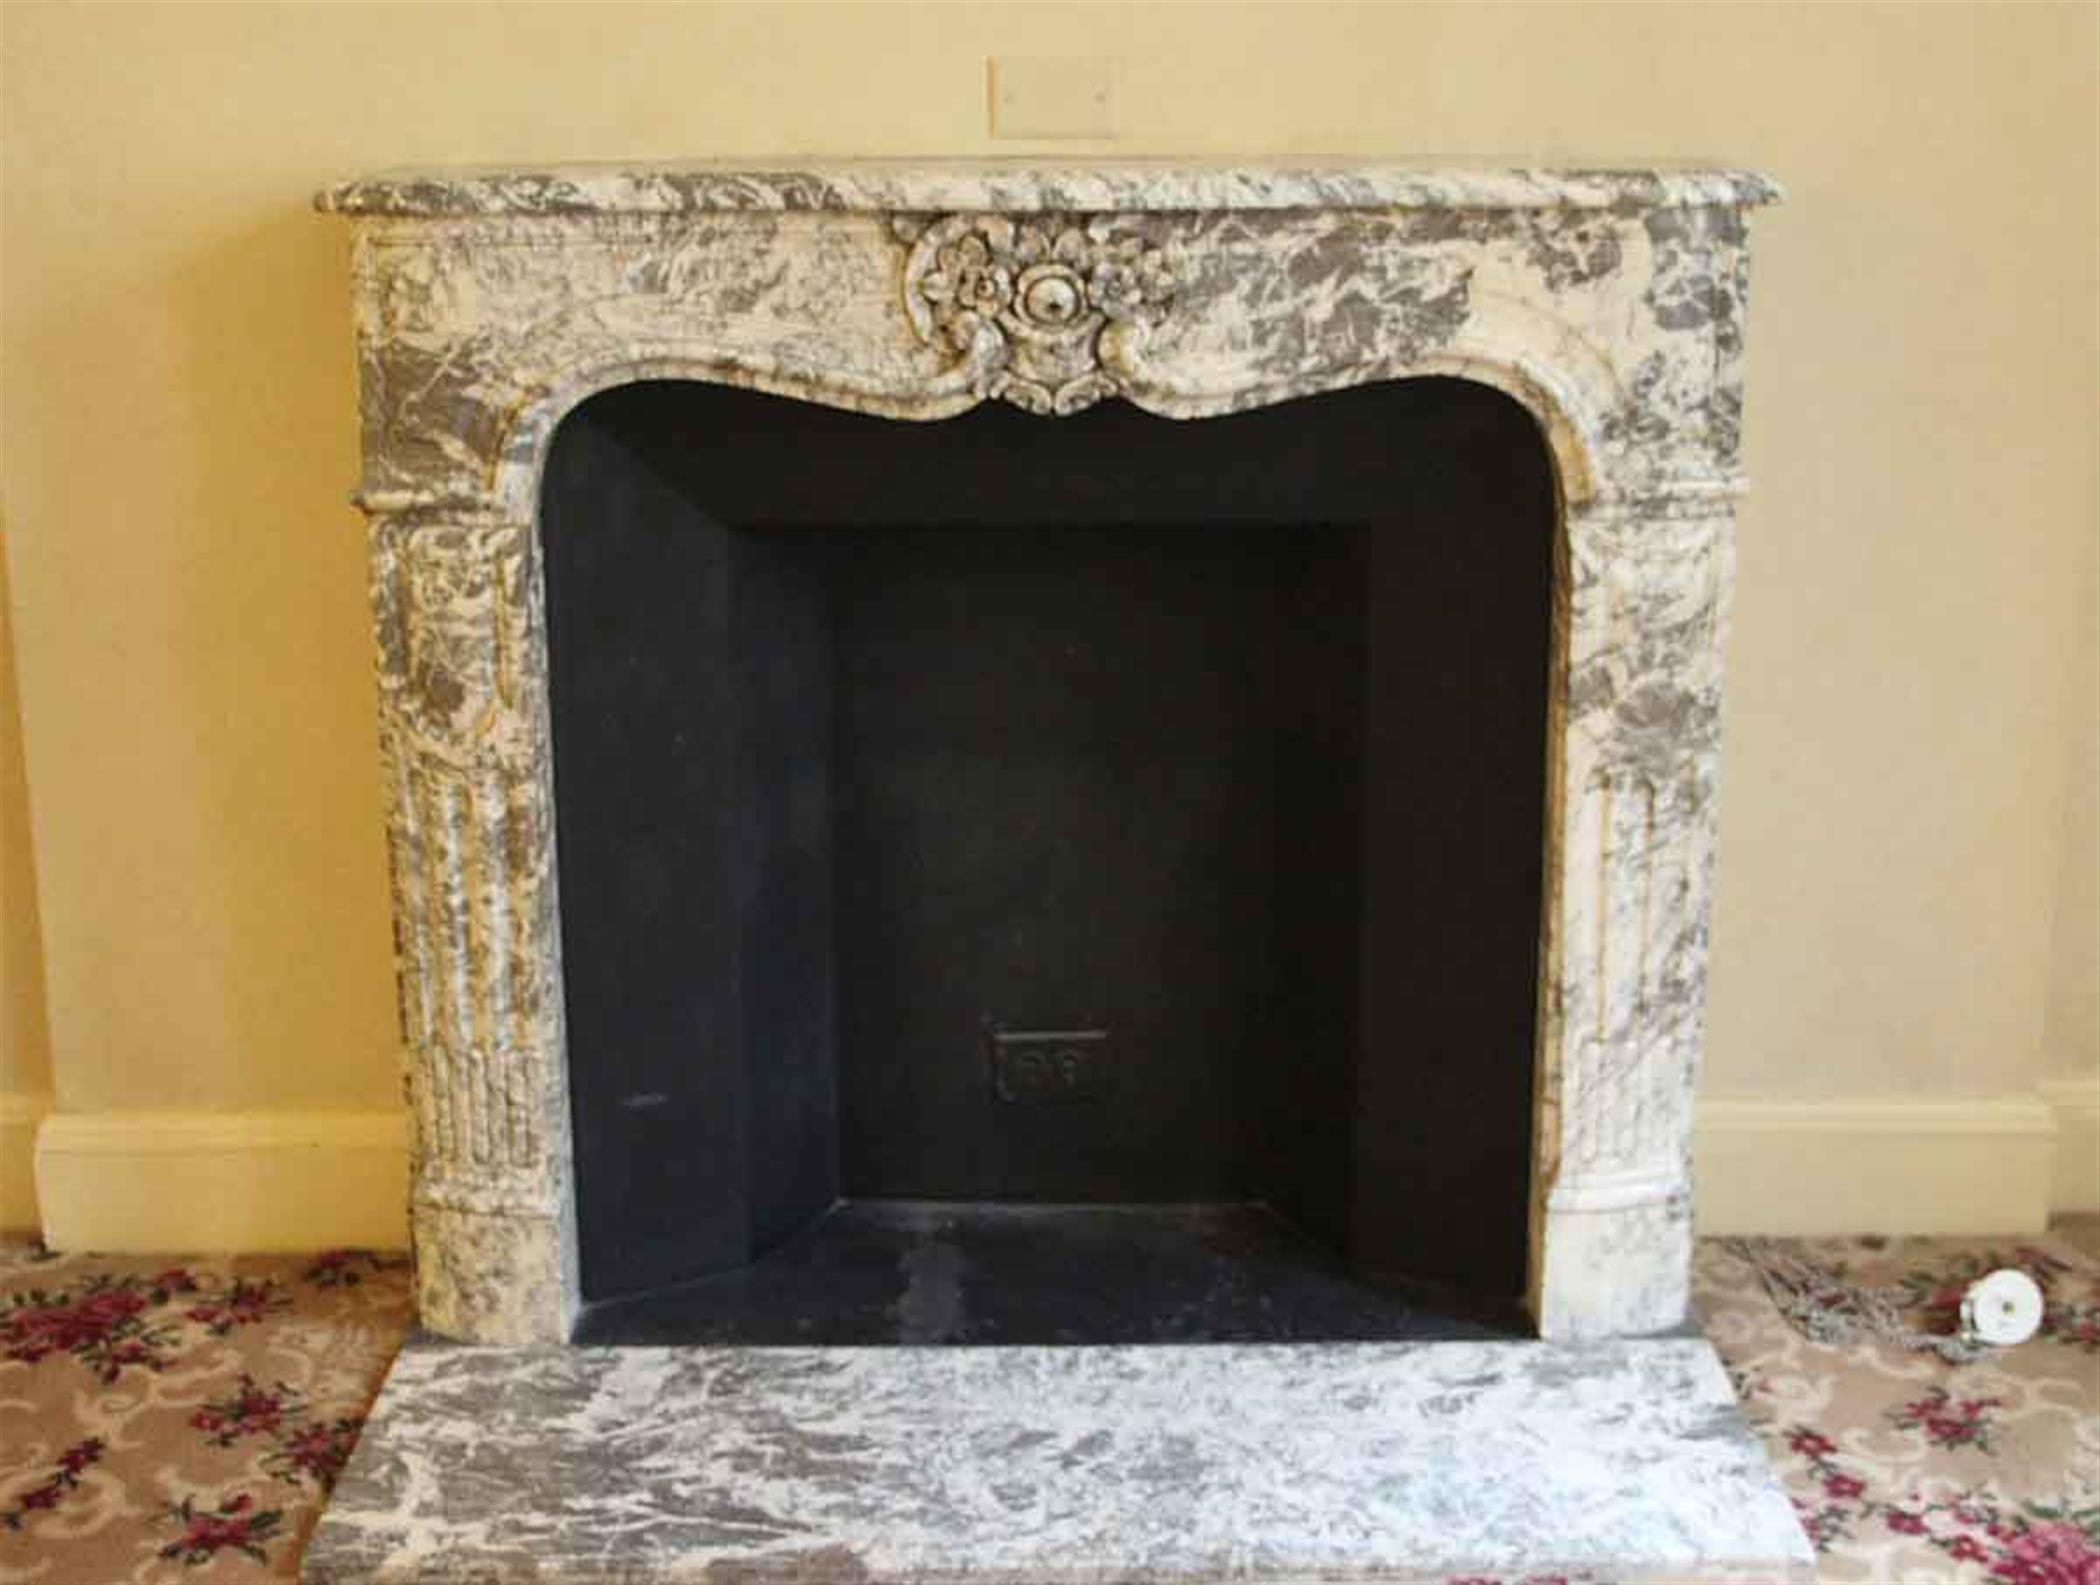 French Louis XV Rococo style gray and white marble mantel with the original matching hearth. This mantel was one of a group of antique mantels imported from Europe and installed in the Waldorf Astoria hotel in the 1930s when the hotel was first